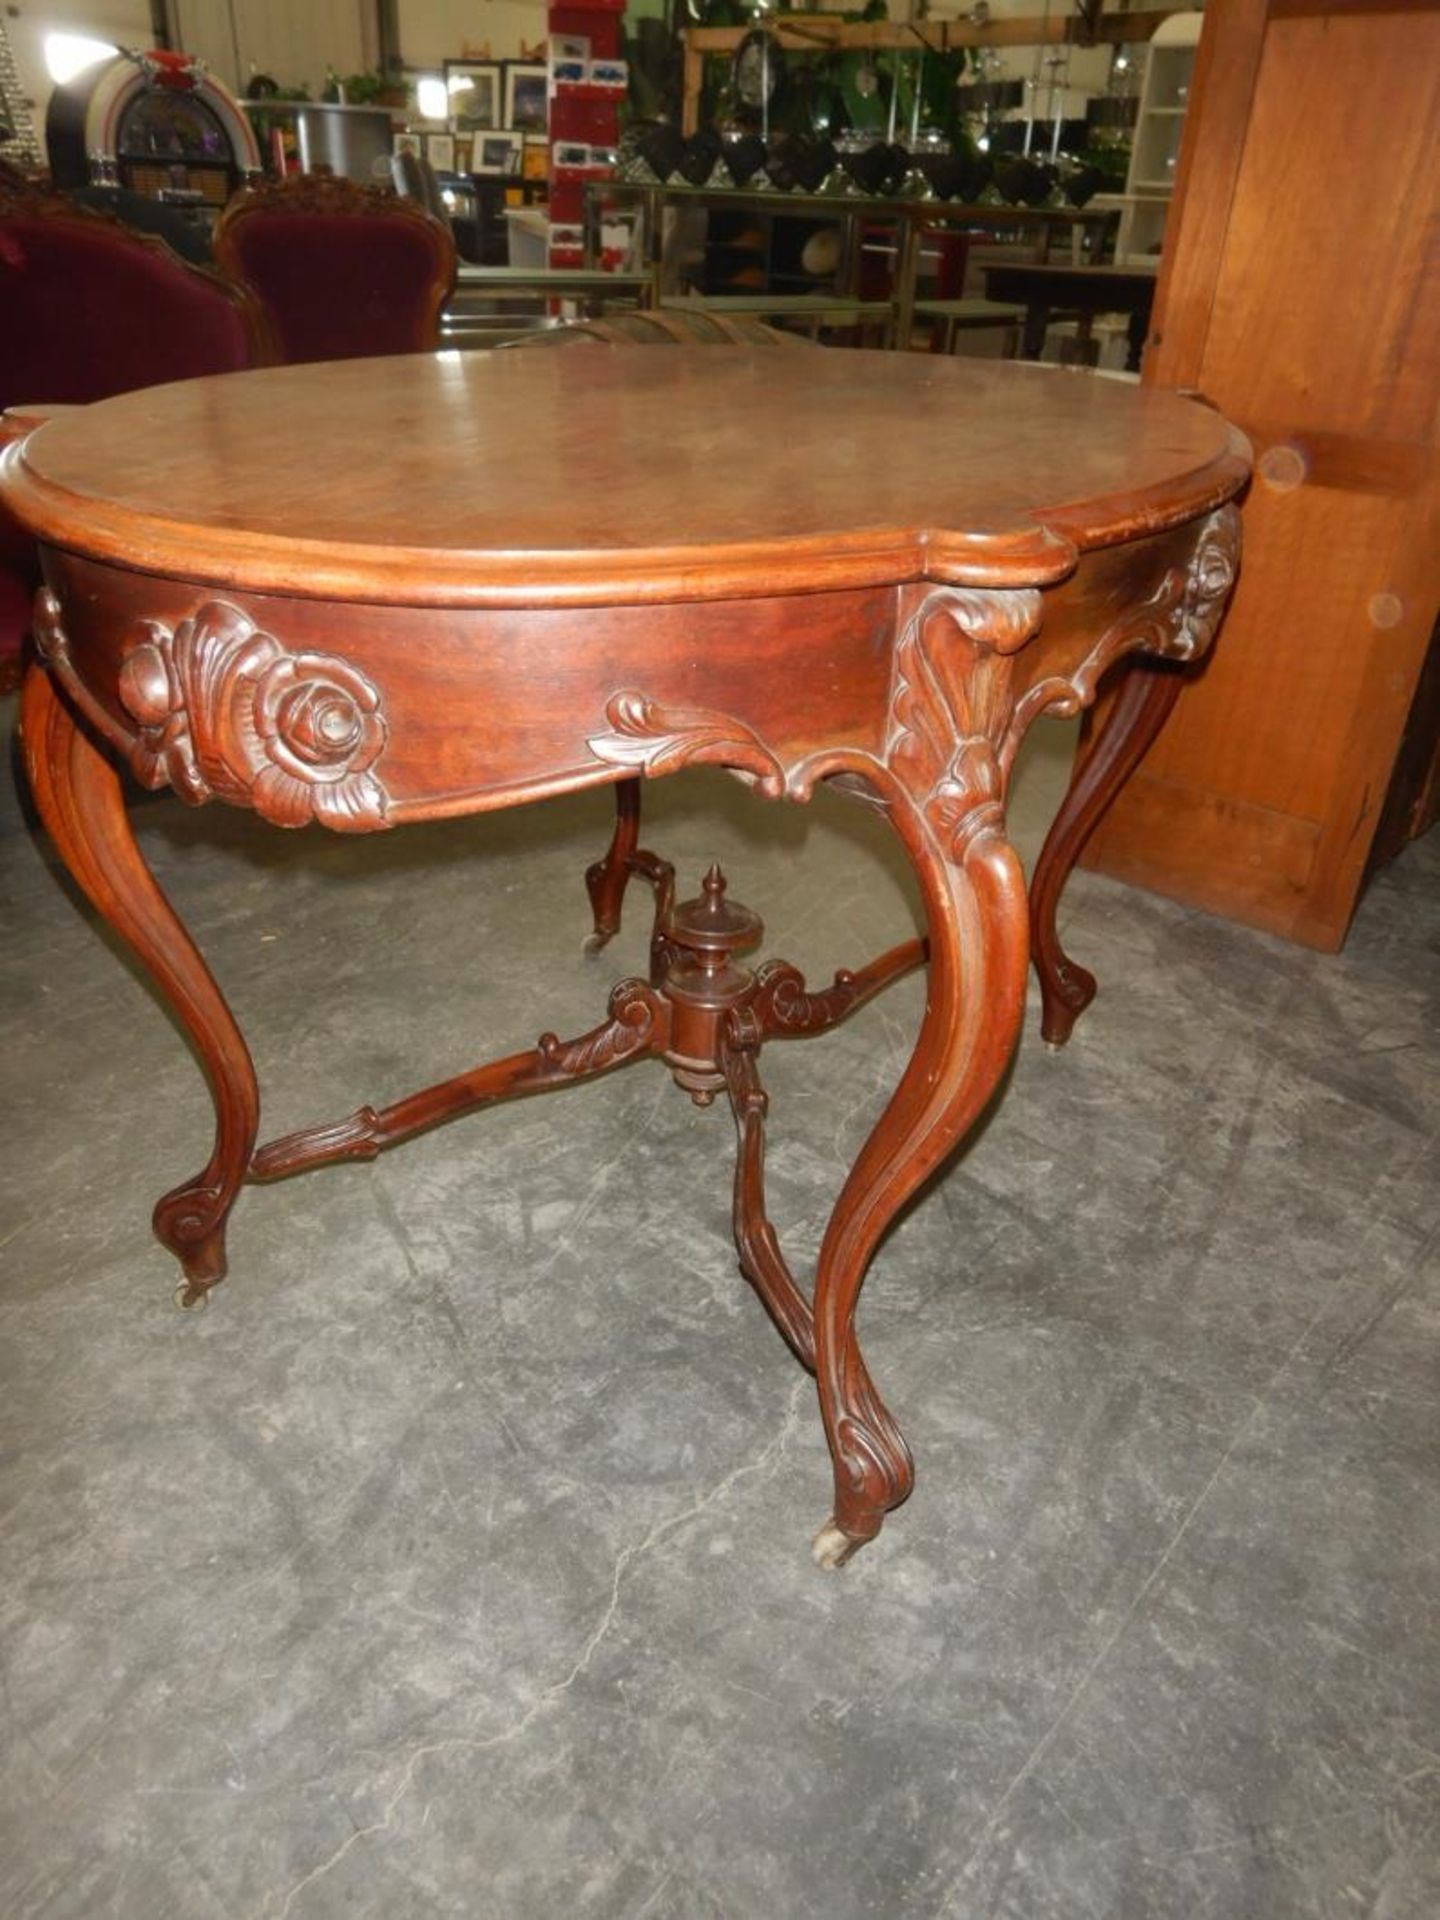 ANTIQUE PARLOR TABLE - BIRD'S EYE MAPLE - Image 2 of 9